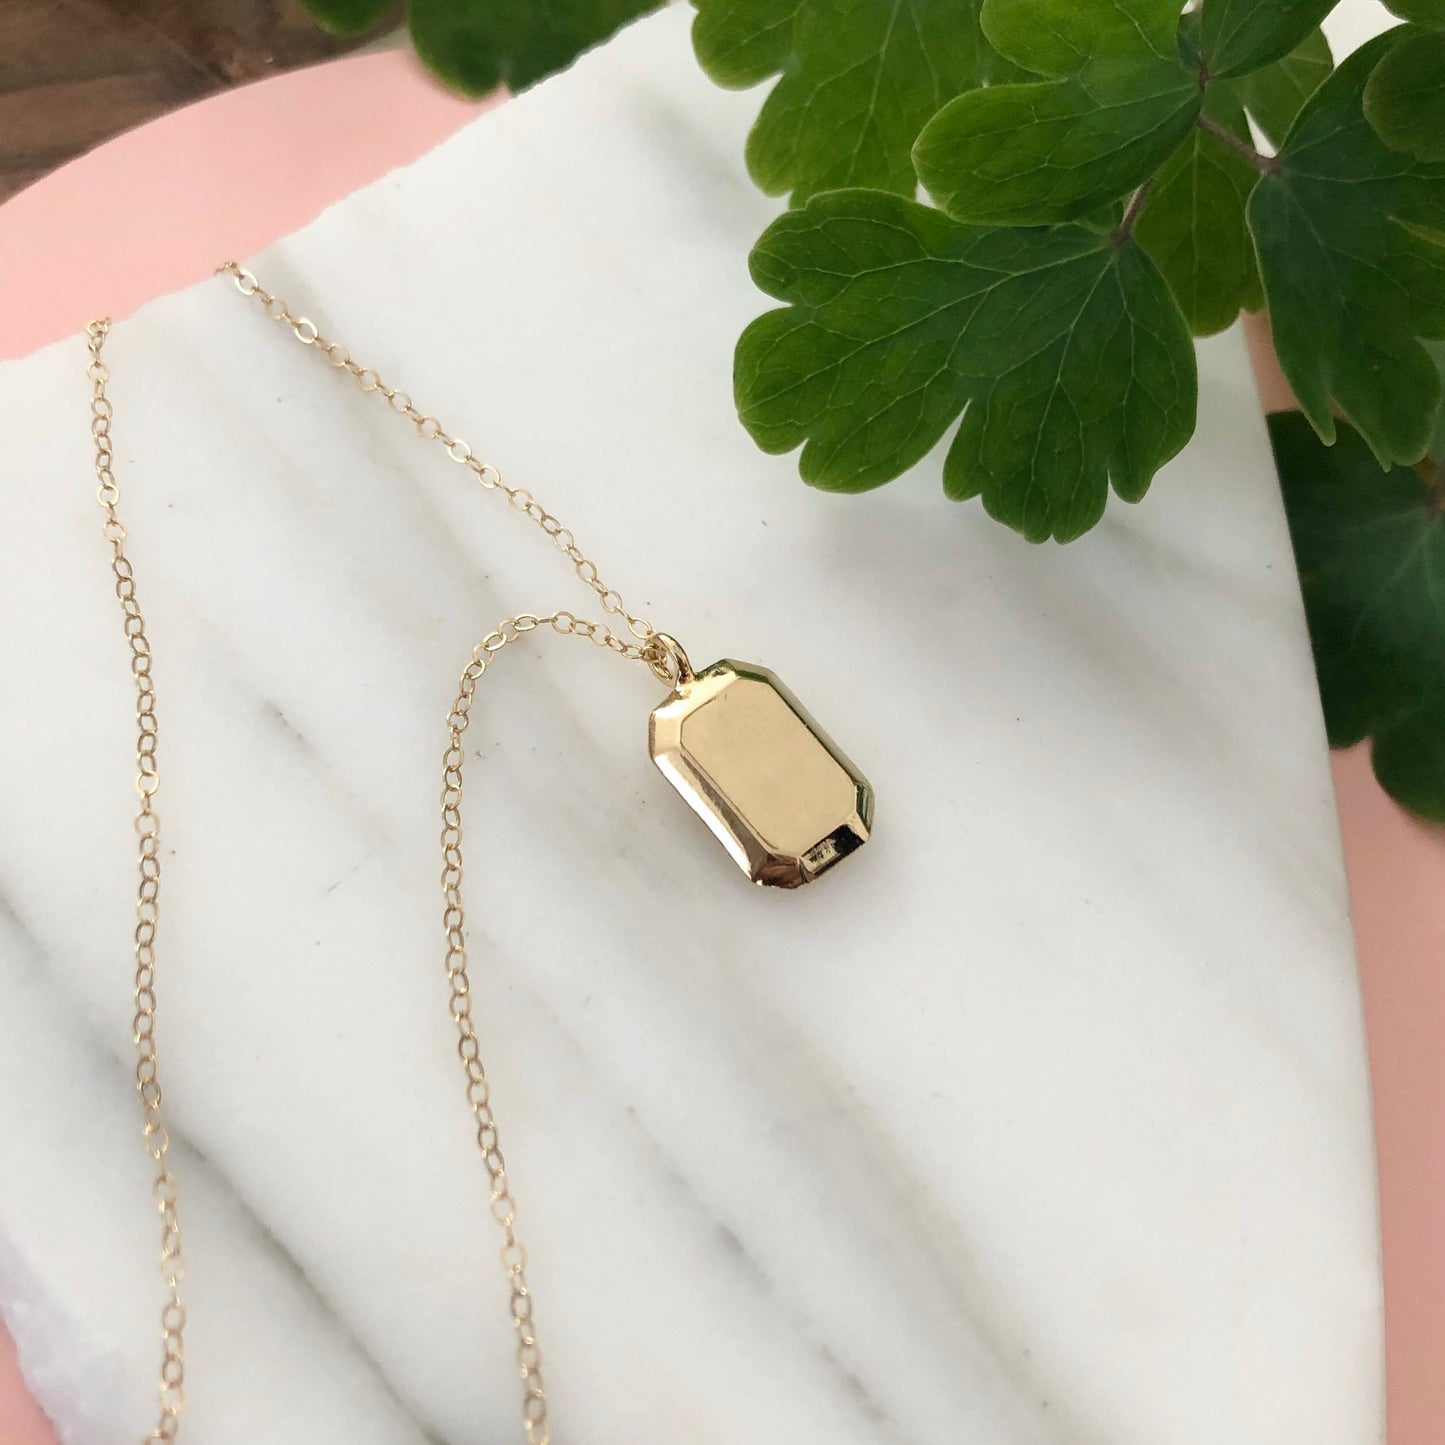 Gold Gemma Necklace displayed on a piece of marble with greenery